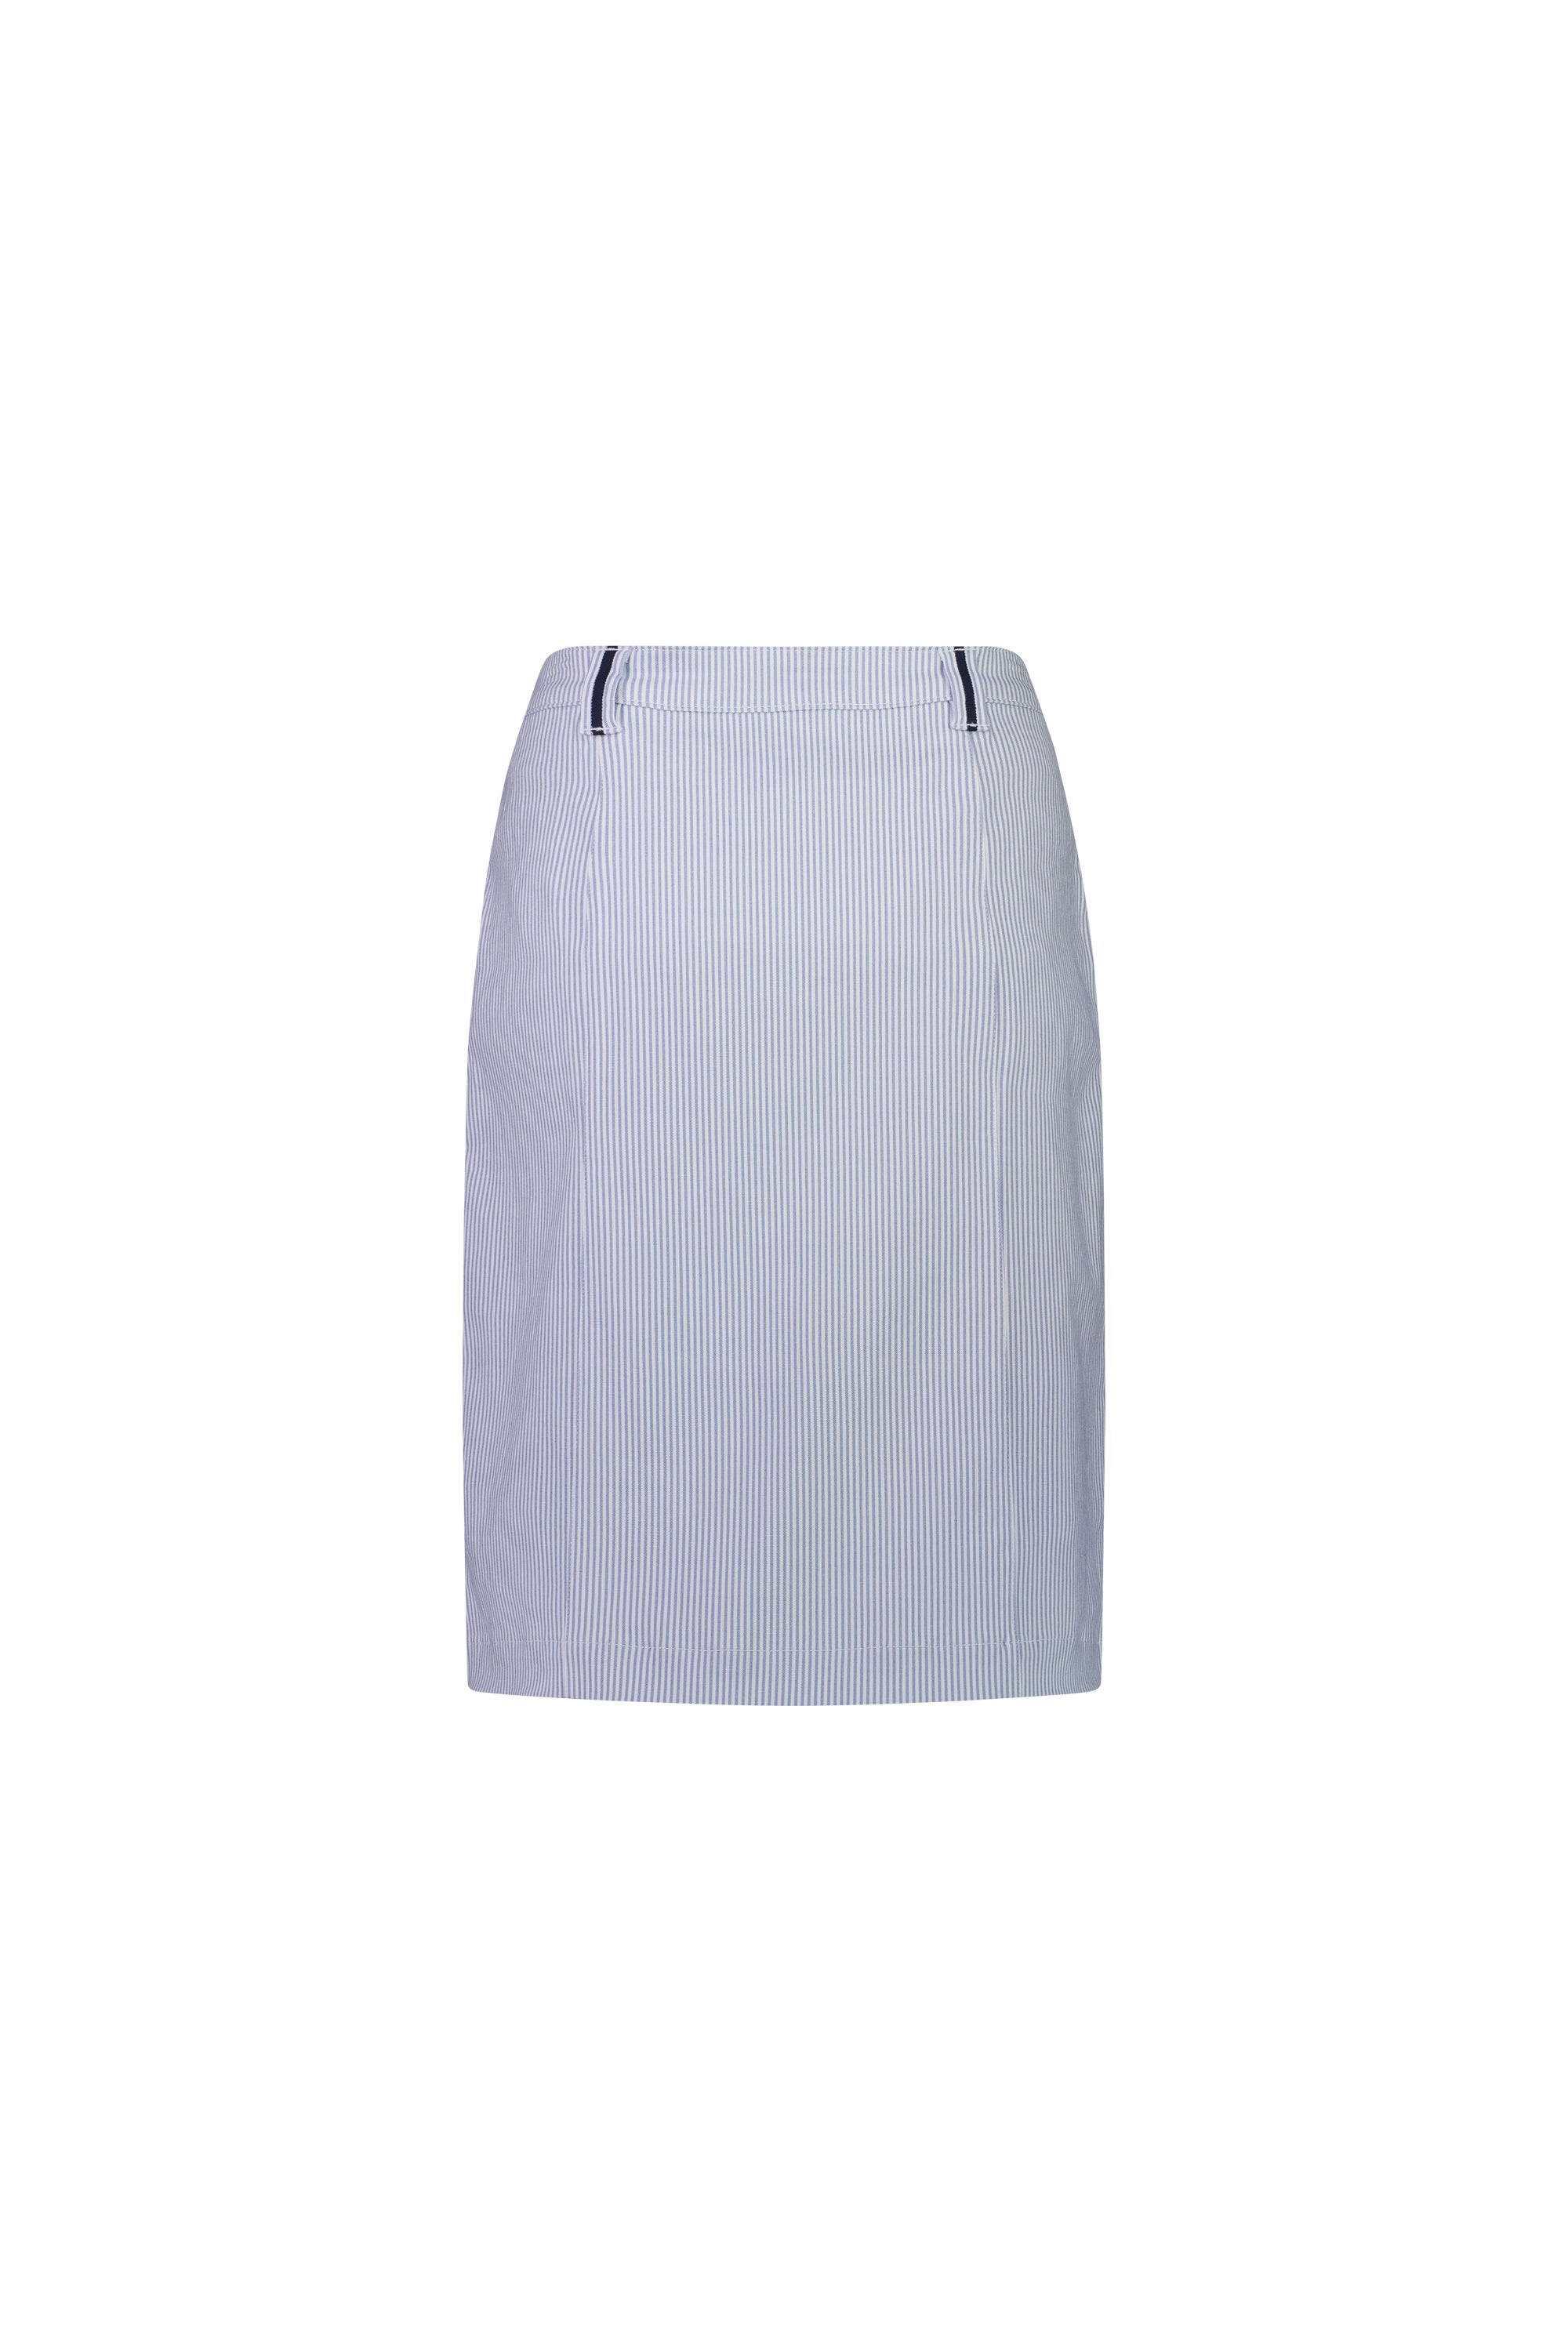 Vassalli Knee Length Skirt with Contrast Buttons and Trim - Stripe